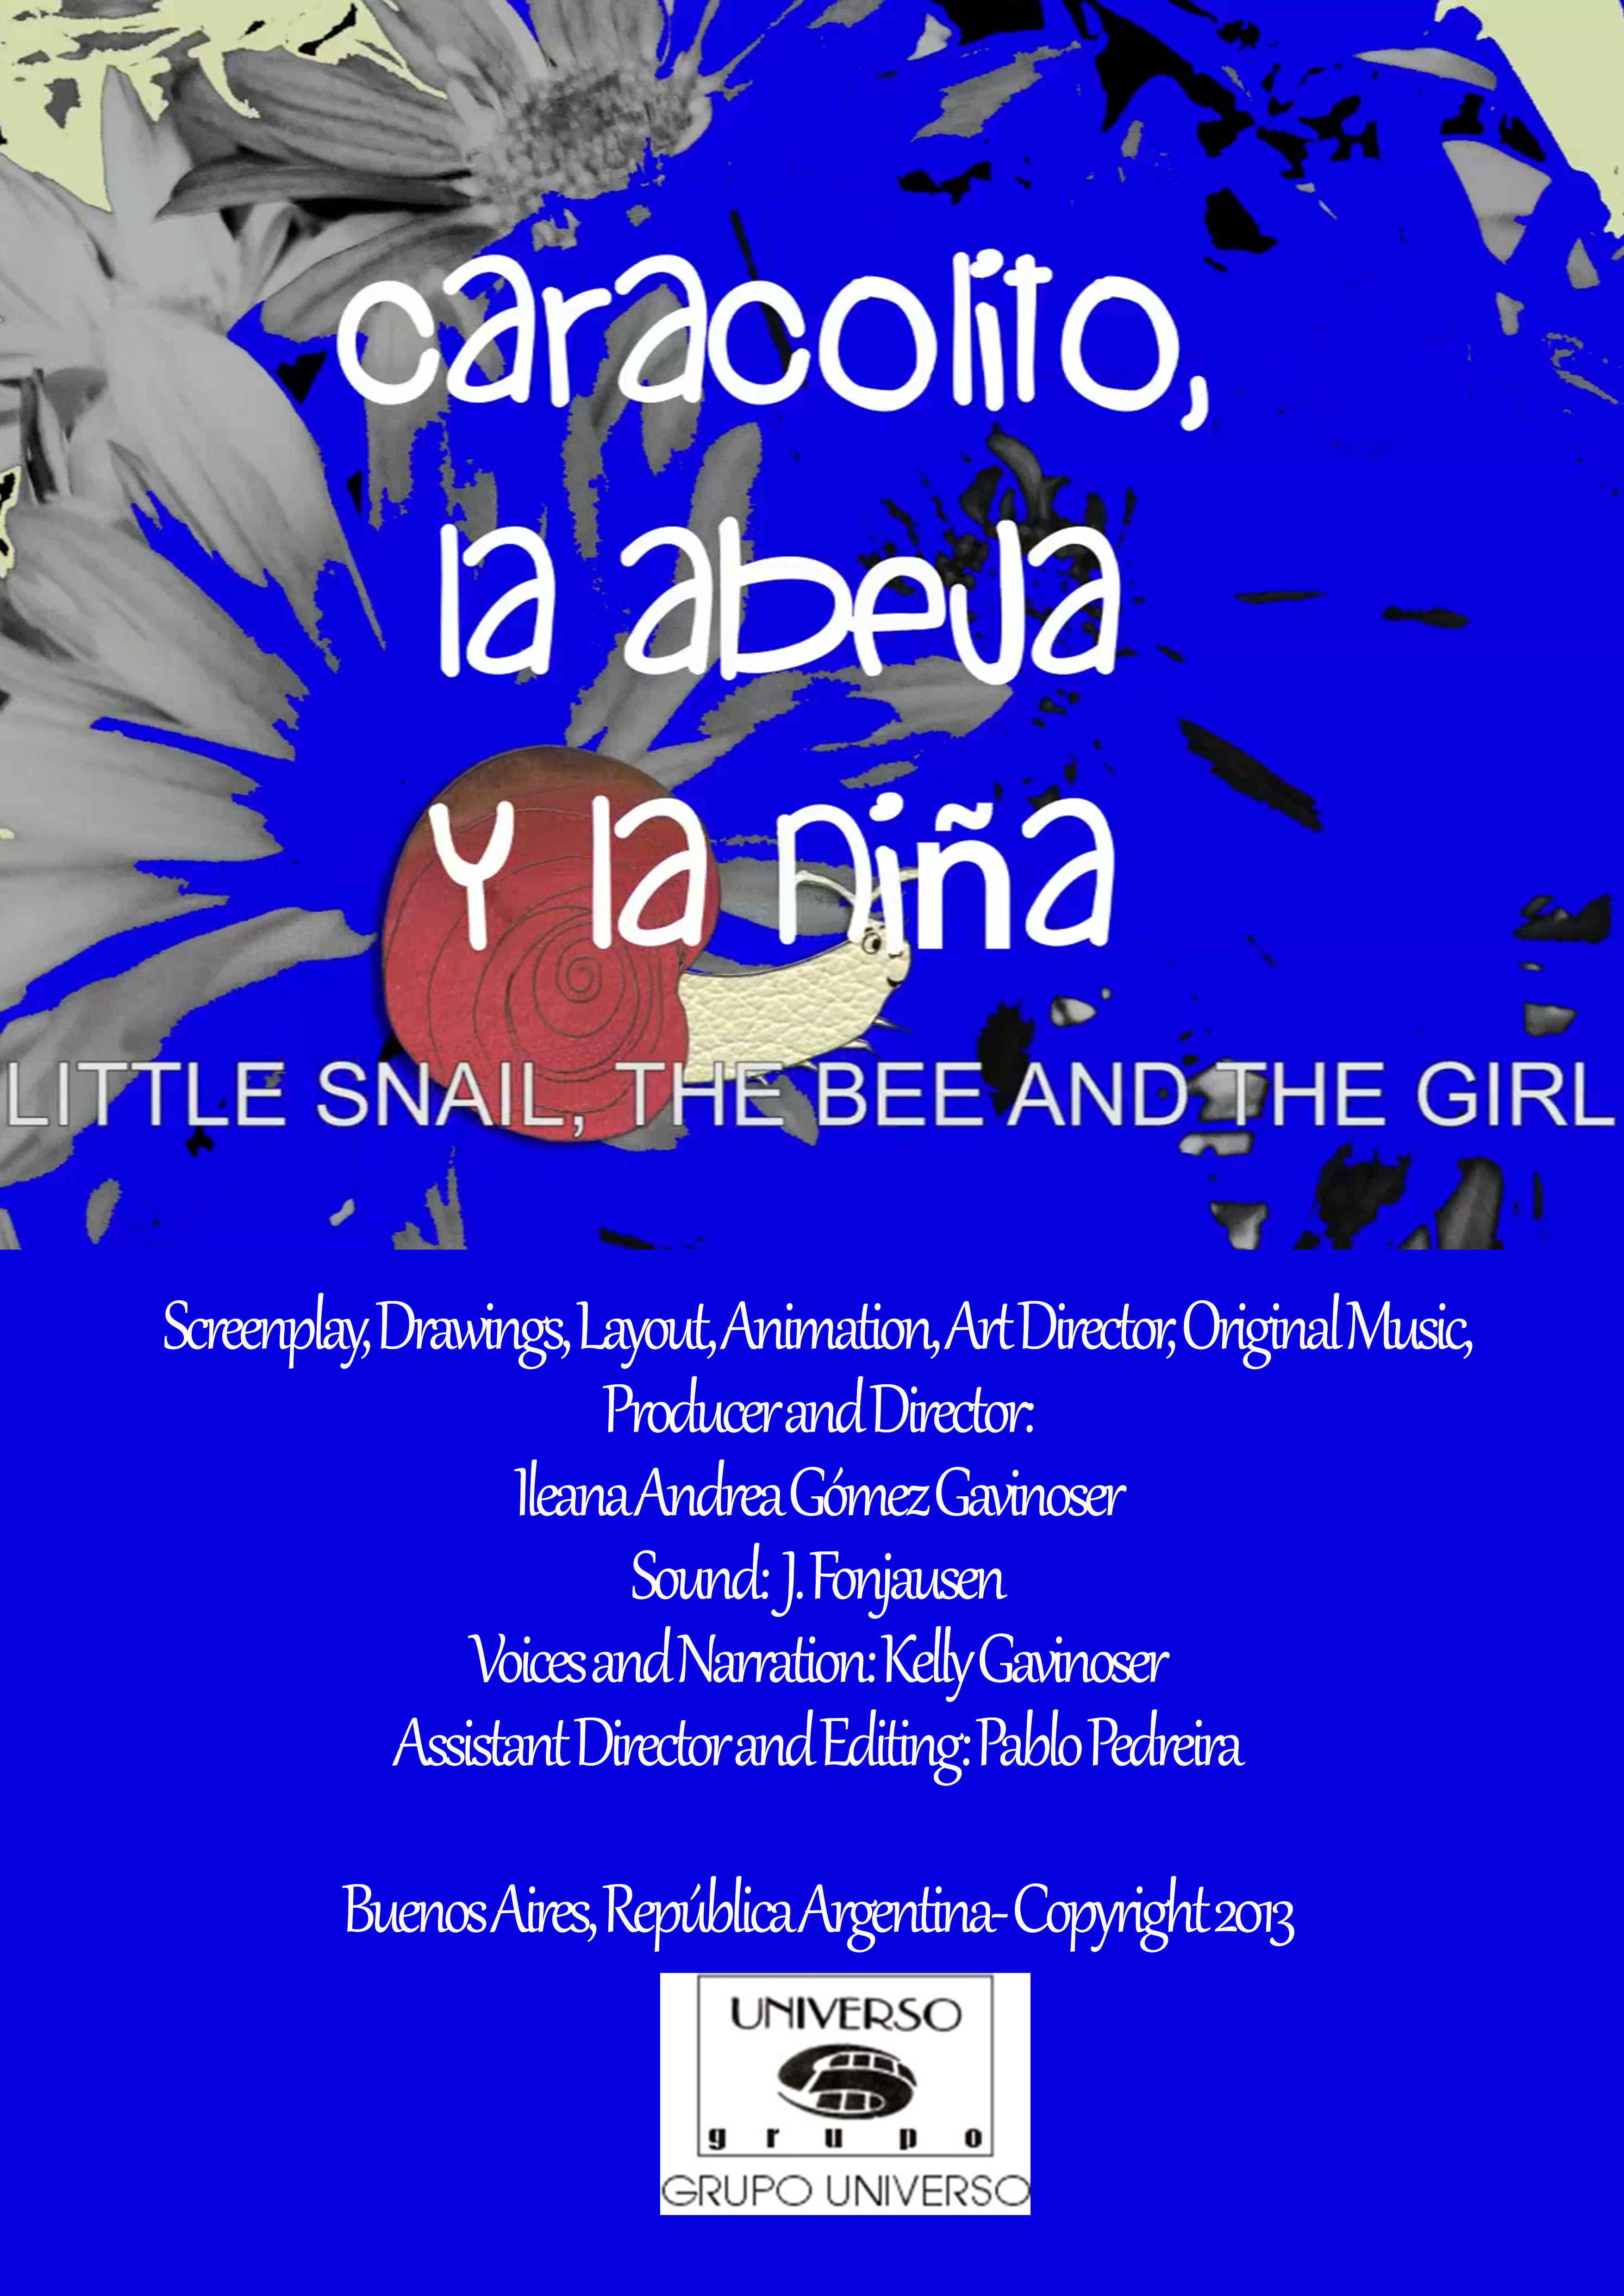 Little Snail, the Bee and the Girl